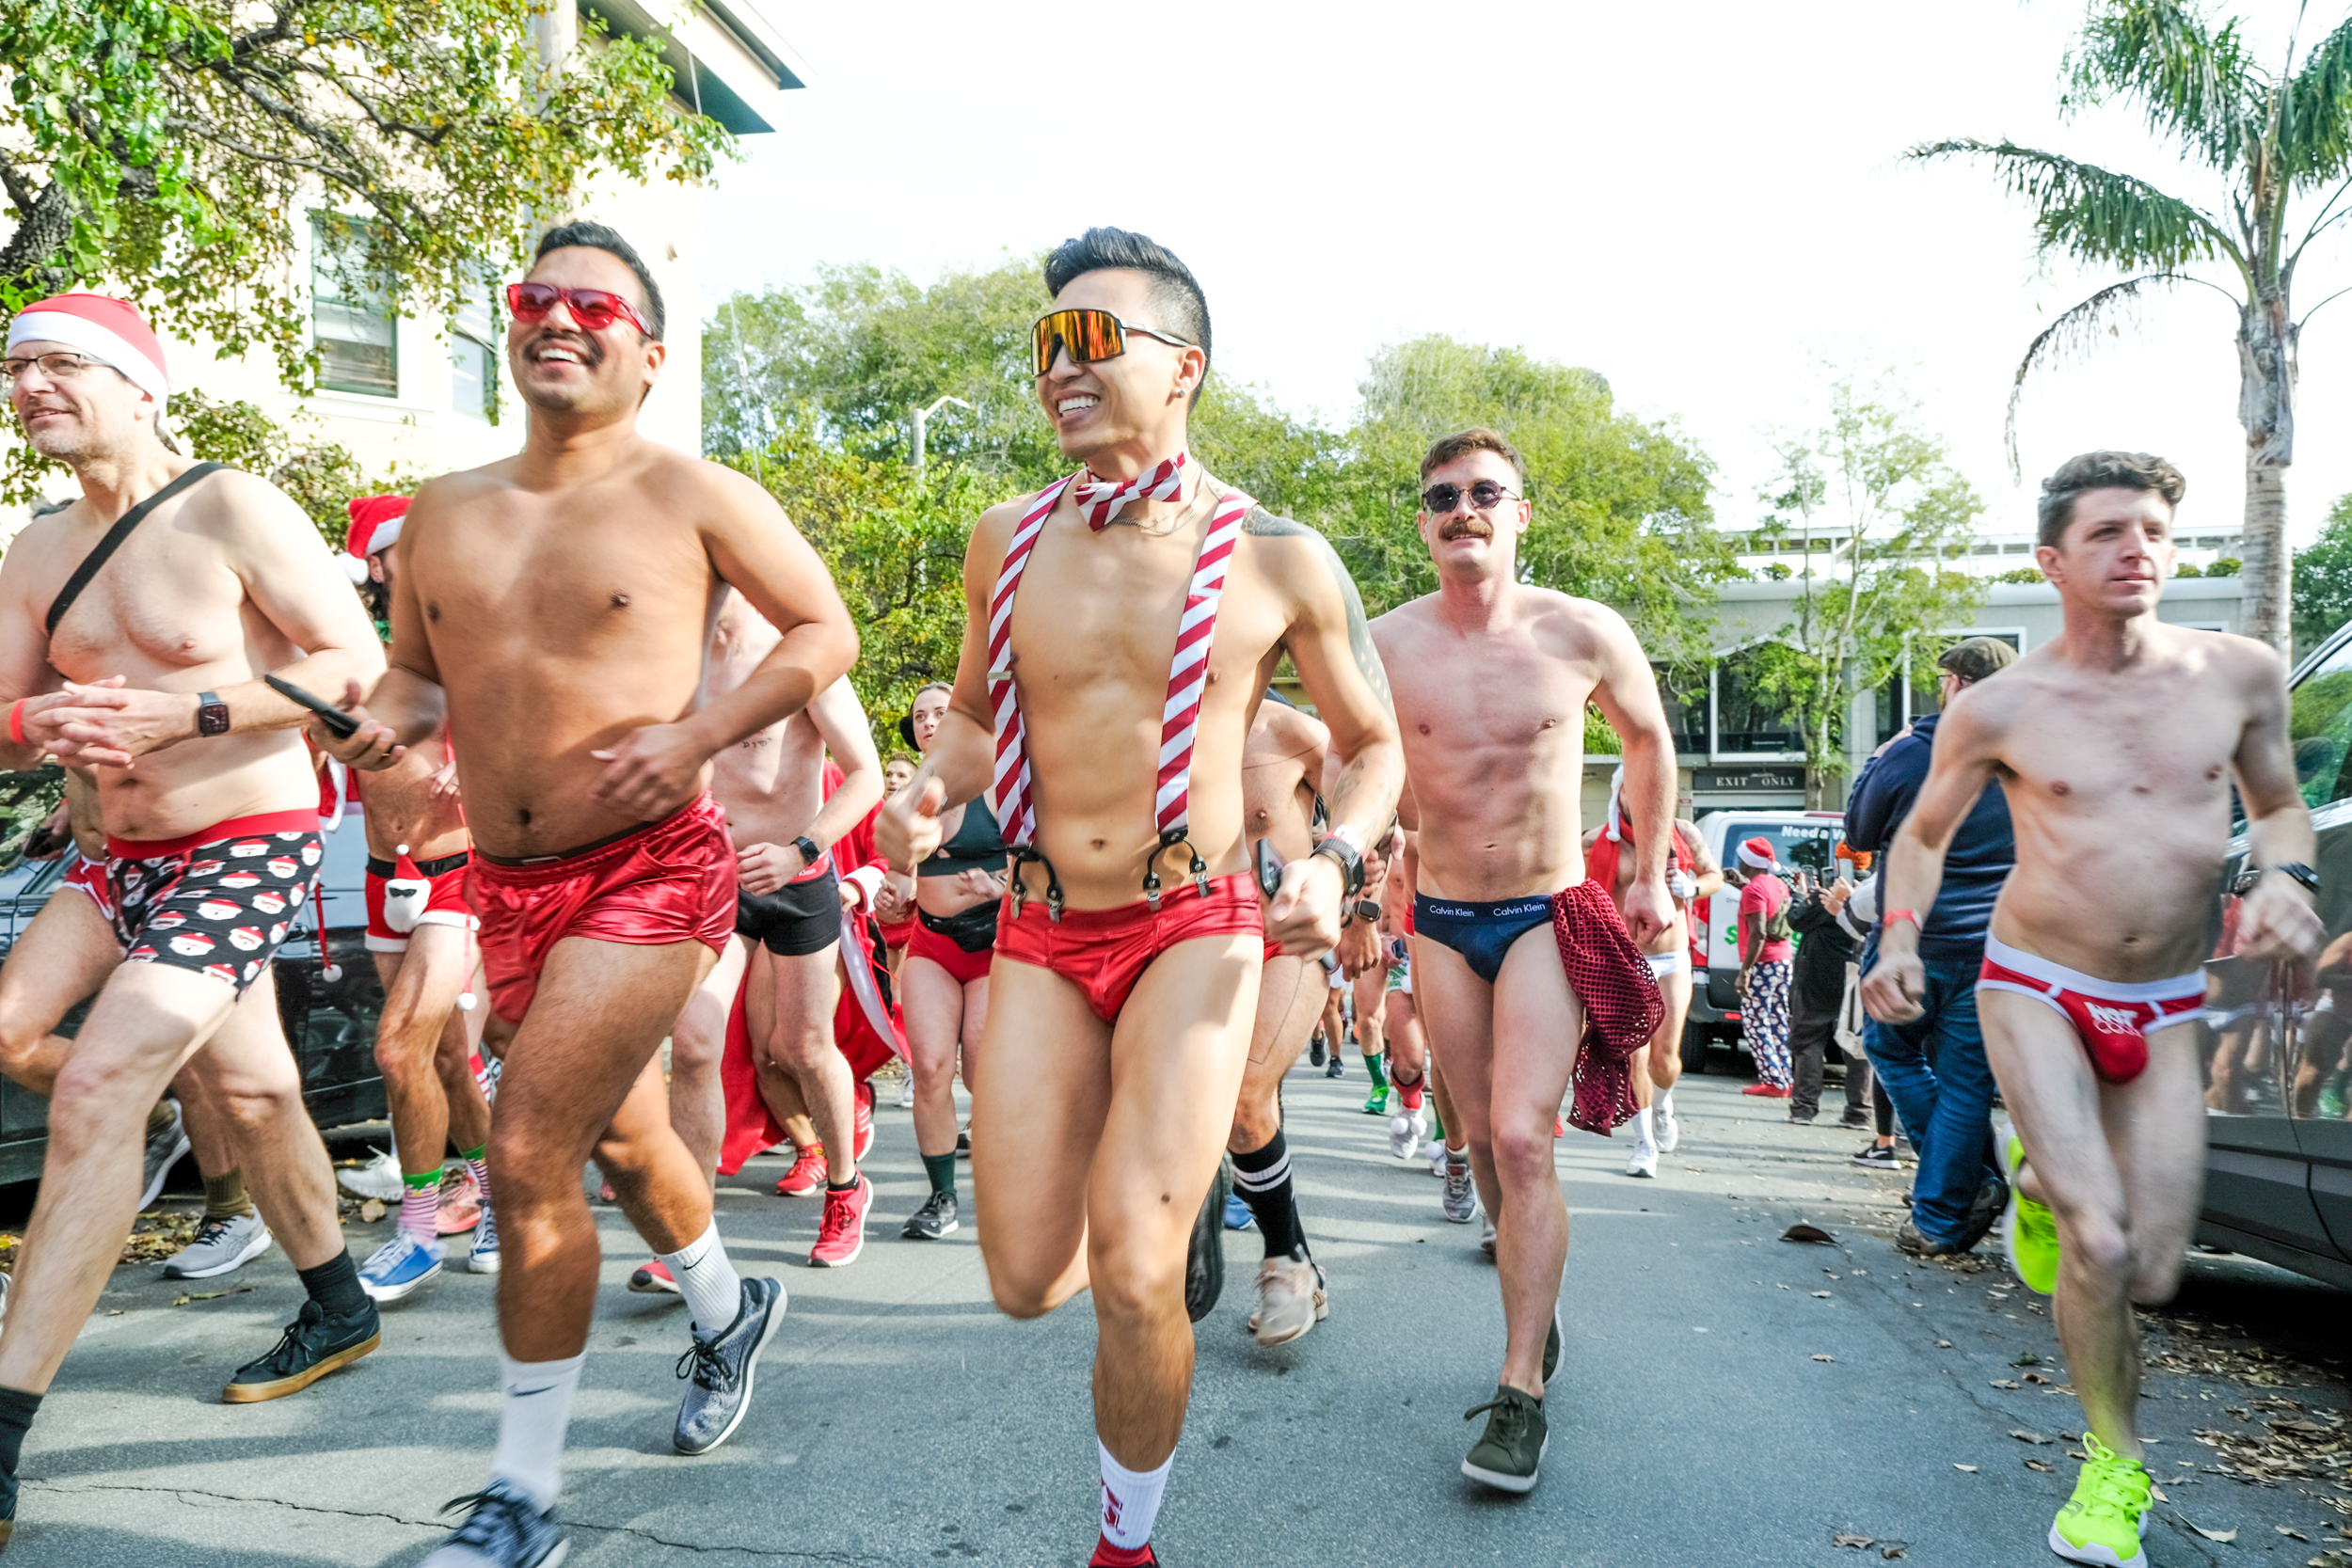 People dressed in underwear and Santa costumes rung across the street during a underwear fun run.